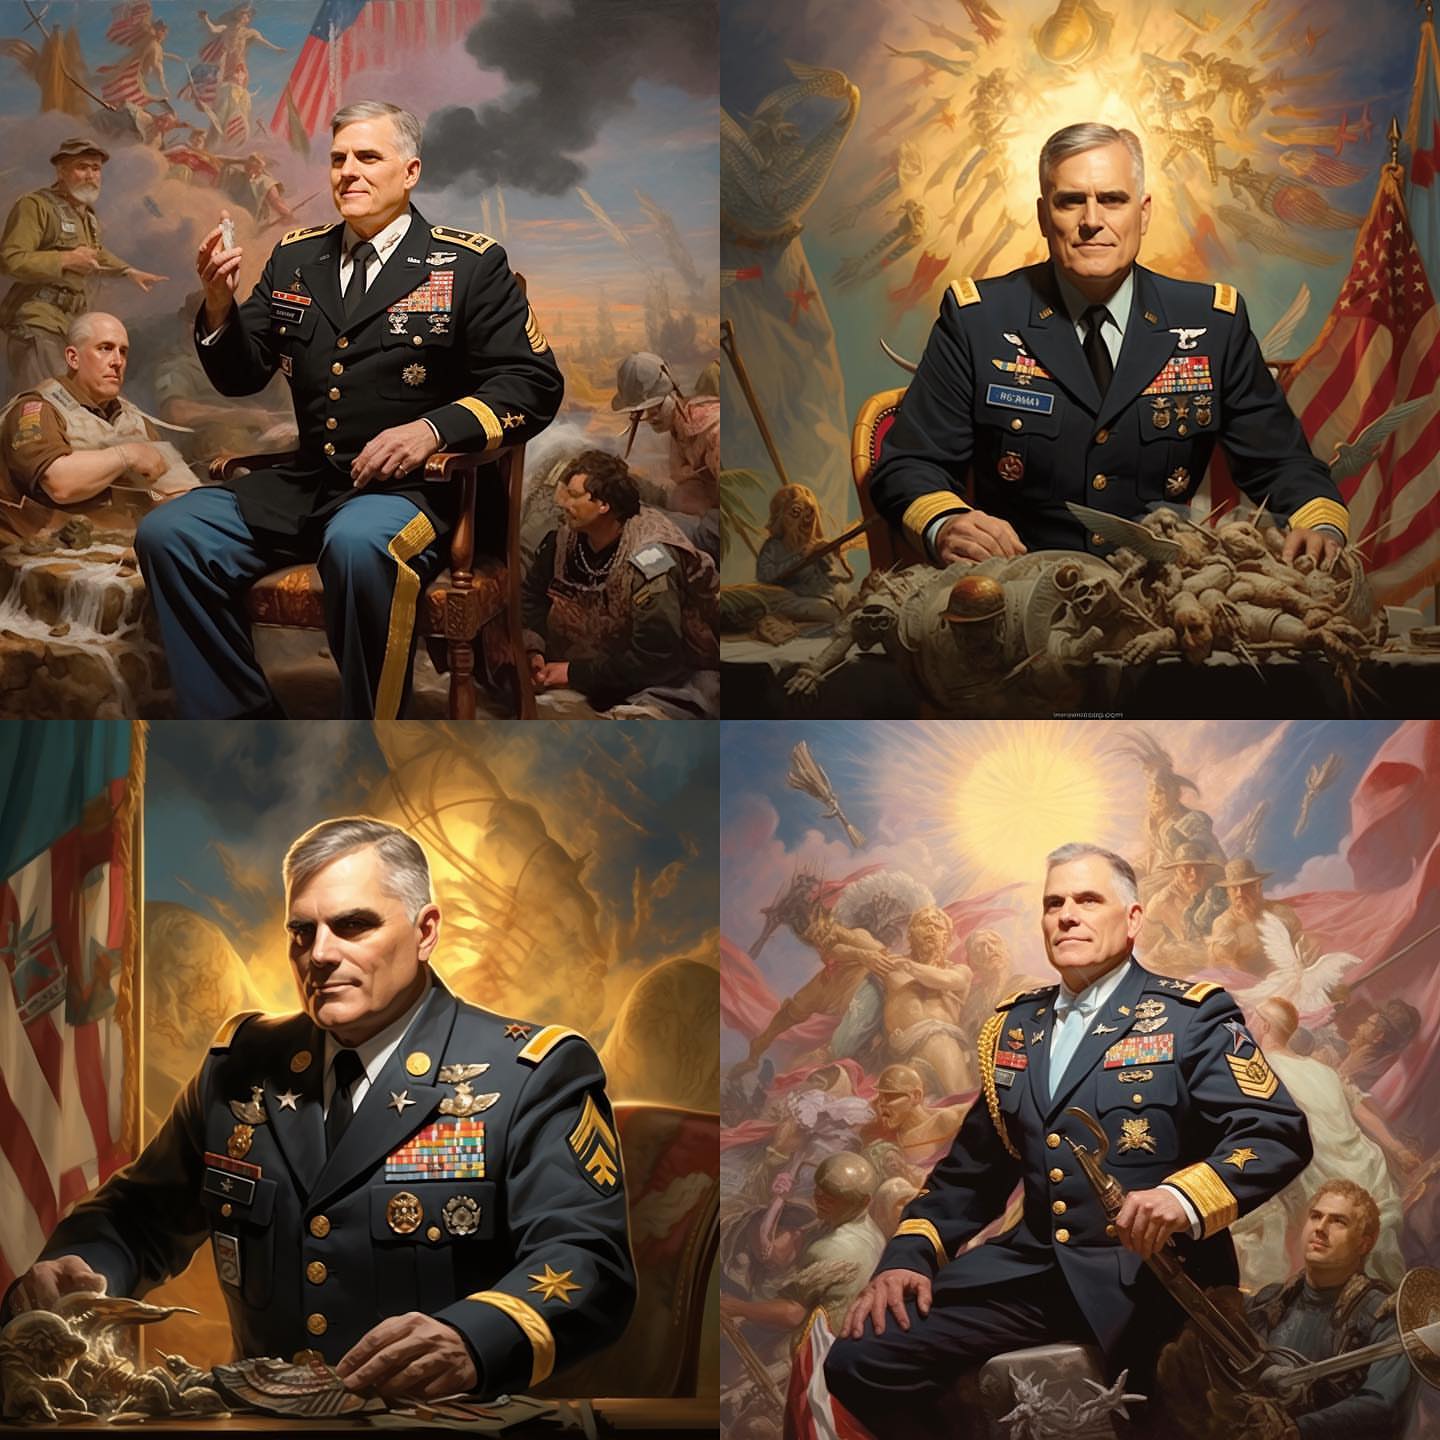 General Nimitz has caught onto the whole thing because he keeps eyes in places. Everywhere. He’s been waiting for the right moment to pounce and when he does he’s going to tell the diamond king on his diamond throne that nuclear is a reaction and that diamonds don’t last forever.